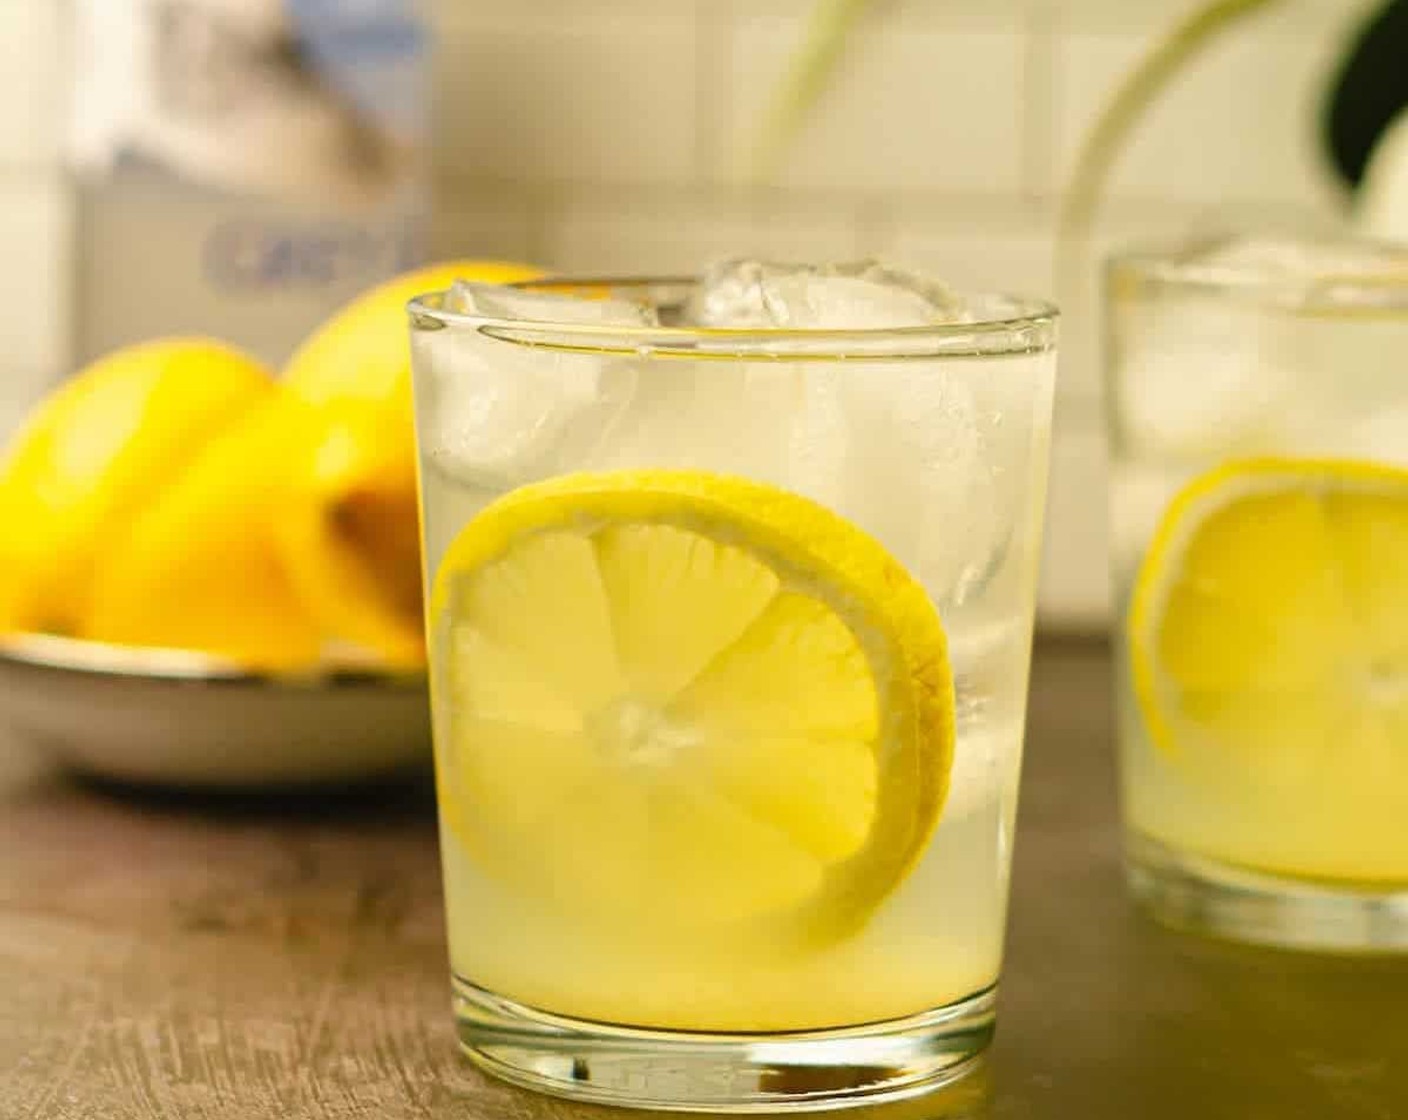 step 2 Strain into cocktail glasses that are filled with ice. Garnish with a lemon slice or wedge and enjoy!